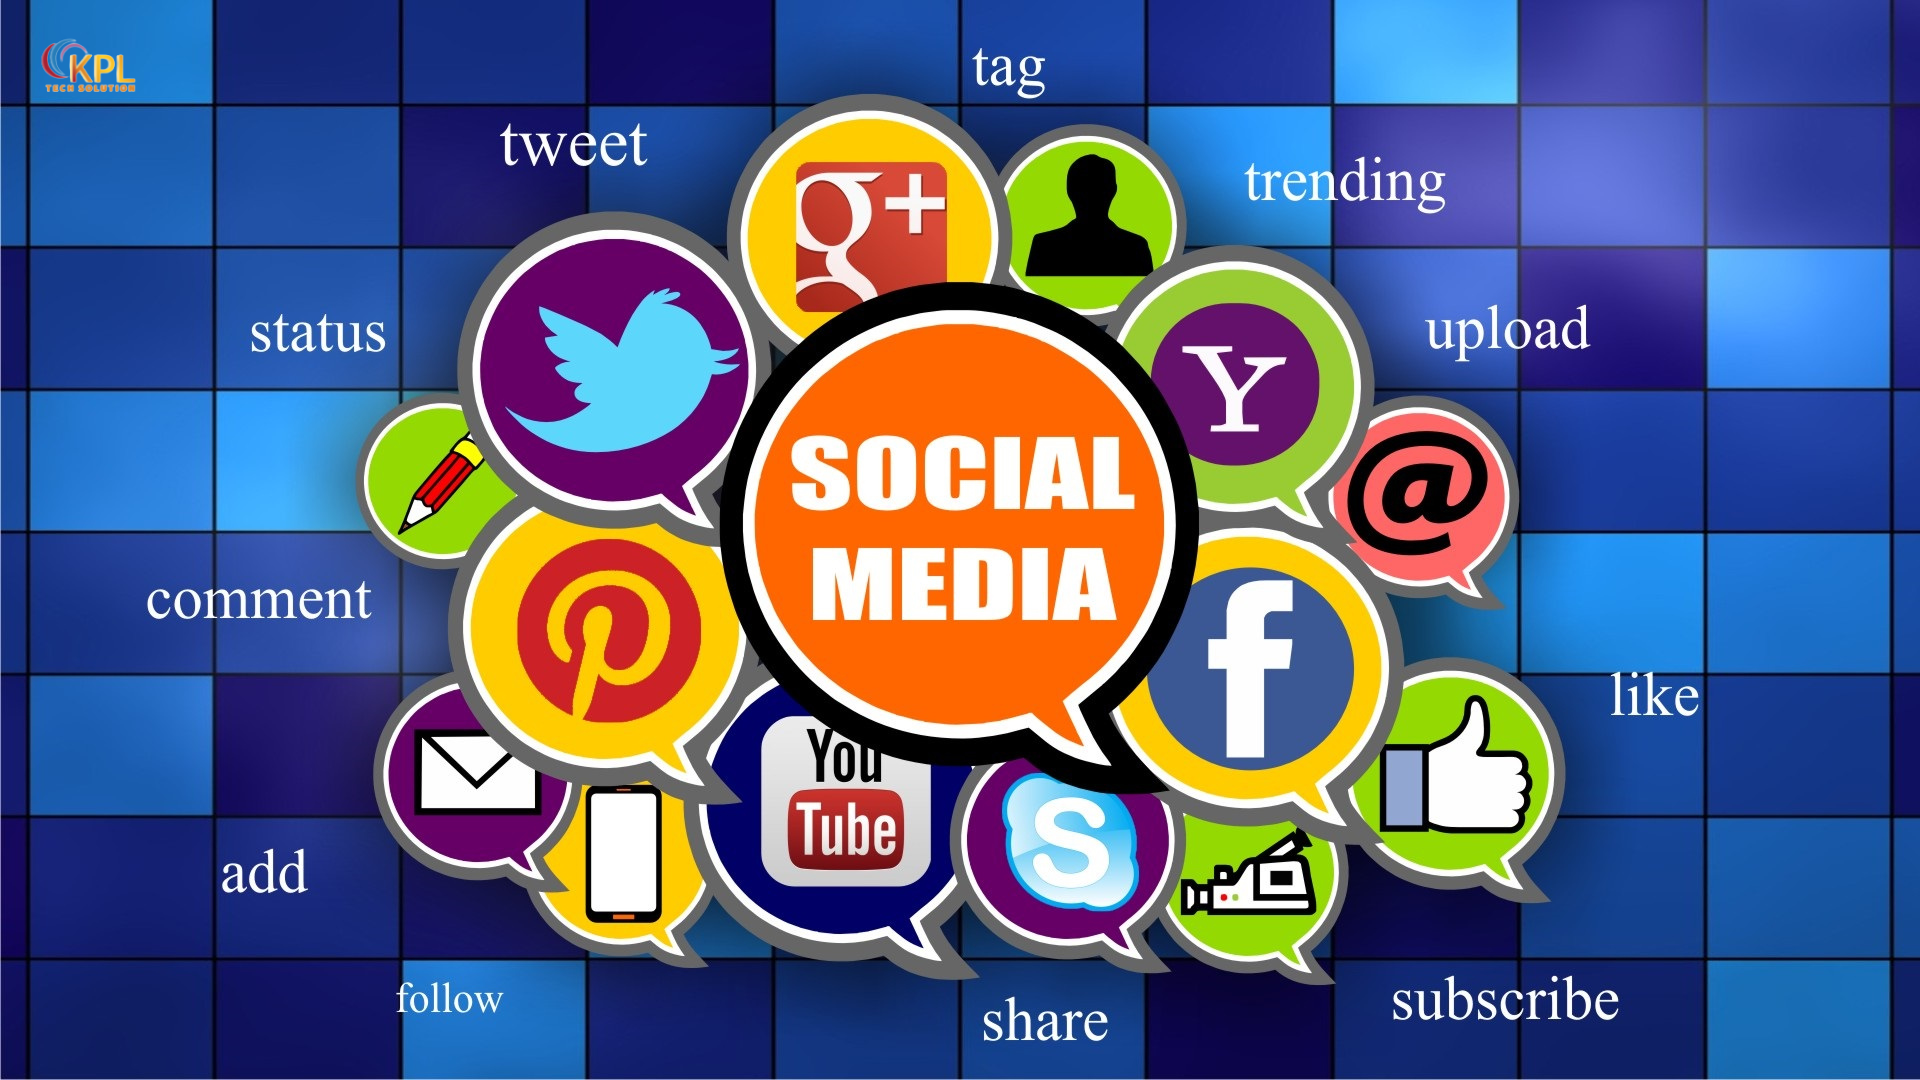 Social Media Marketing Services: A Treasure To Engage Your Target Audience! 